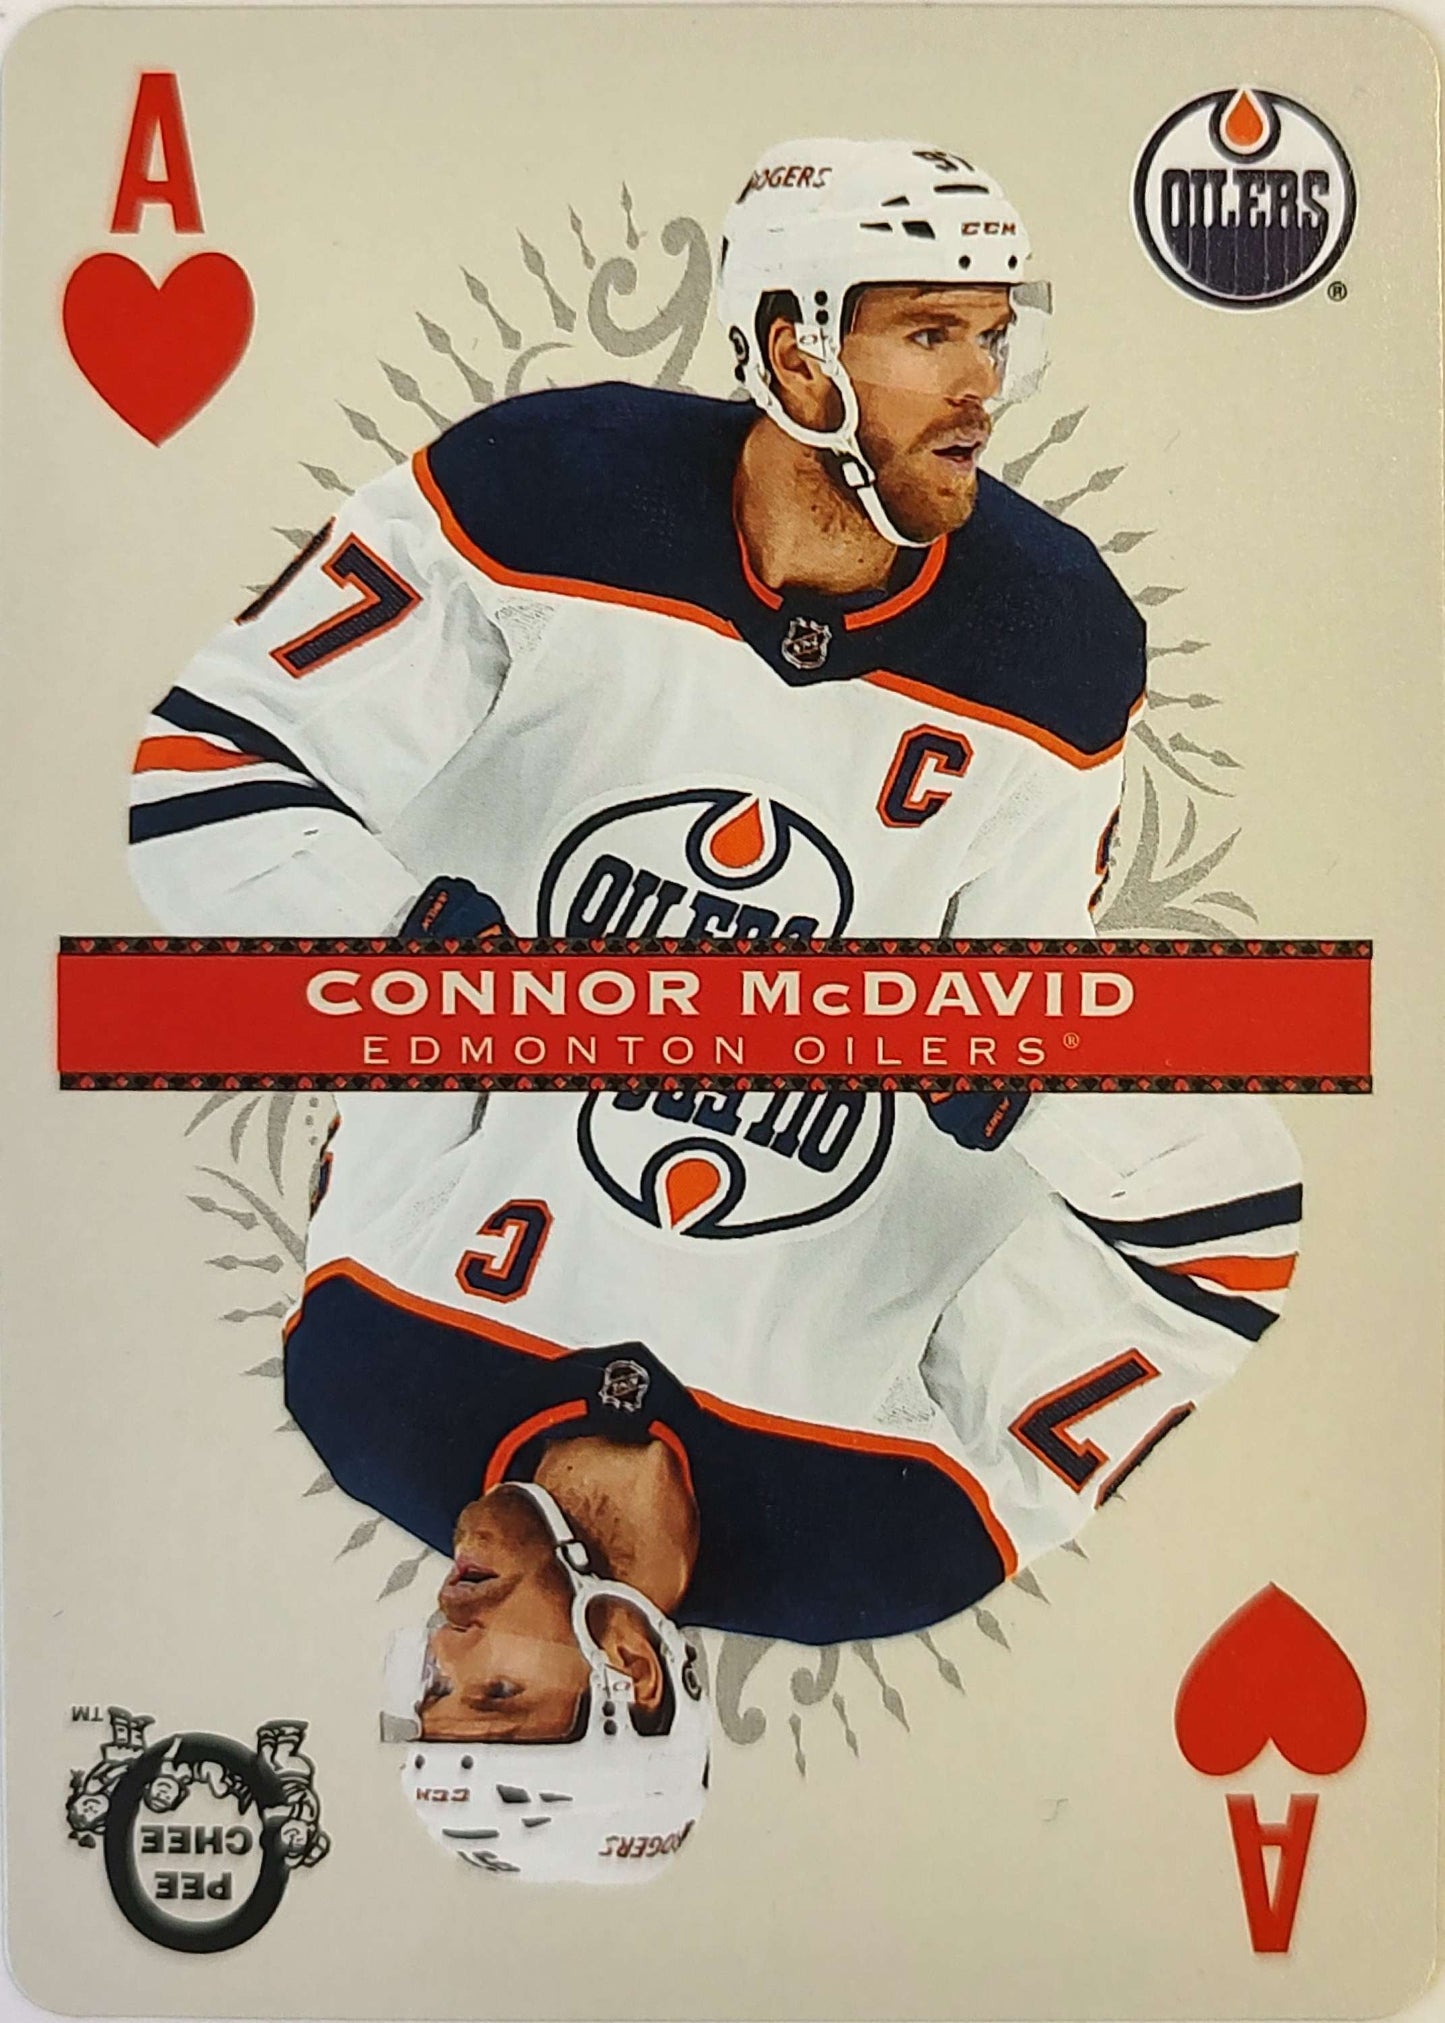 NHL 2021-22 O-Pee-Chee Hockey Connor McDavid Playing Card (Ace of Hearts) (Upper Deck)